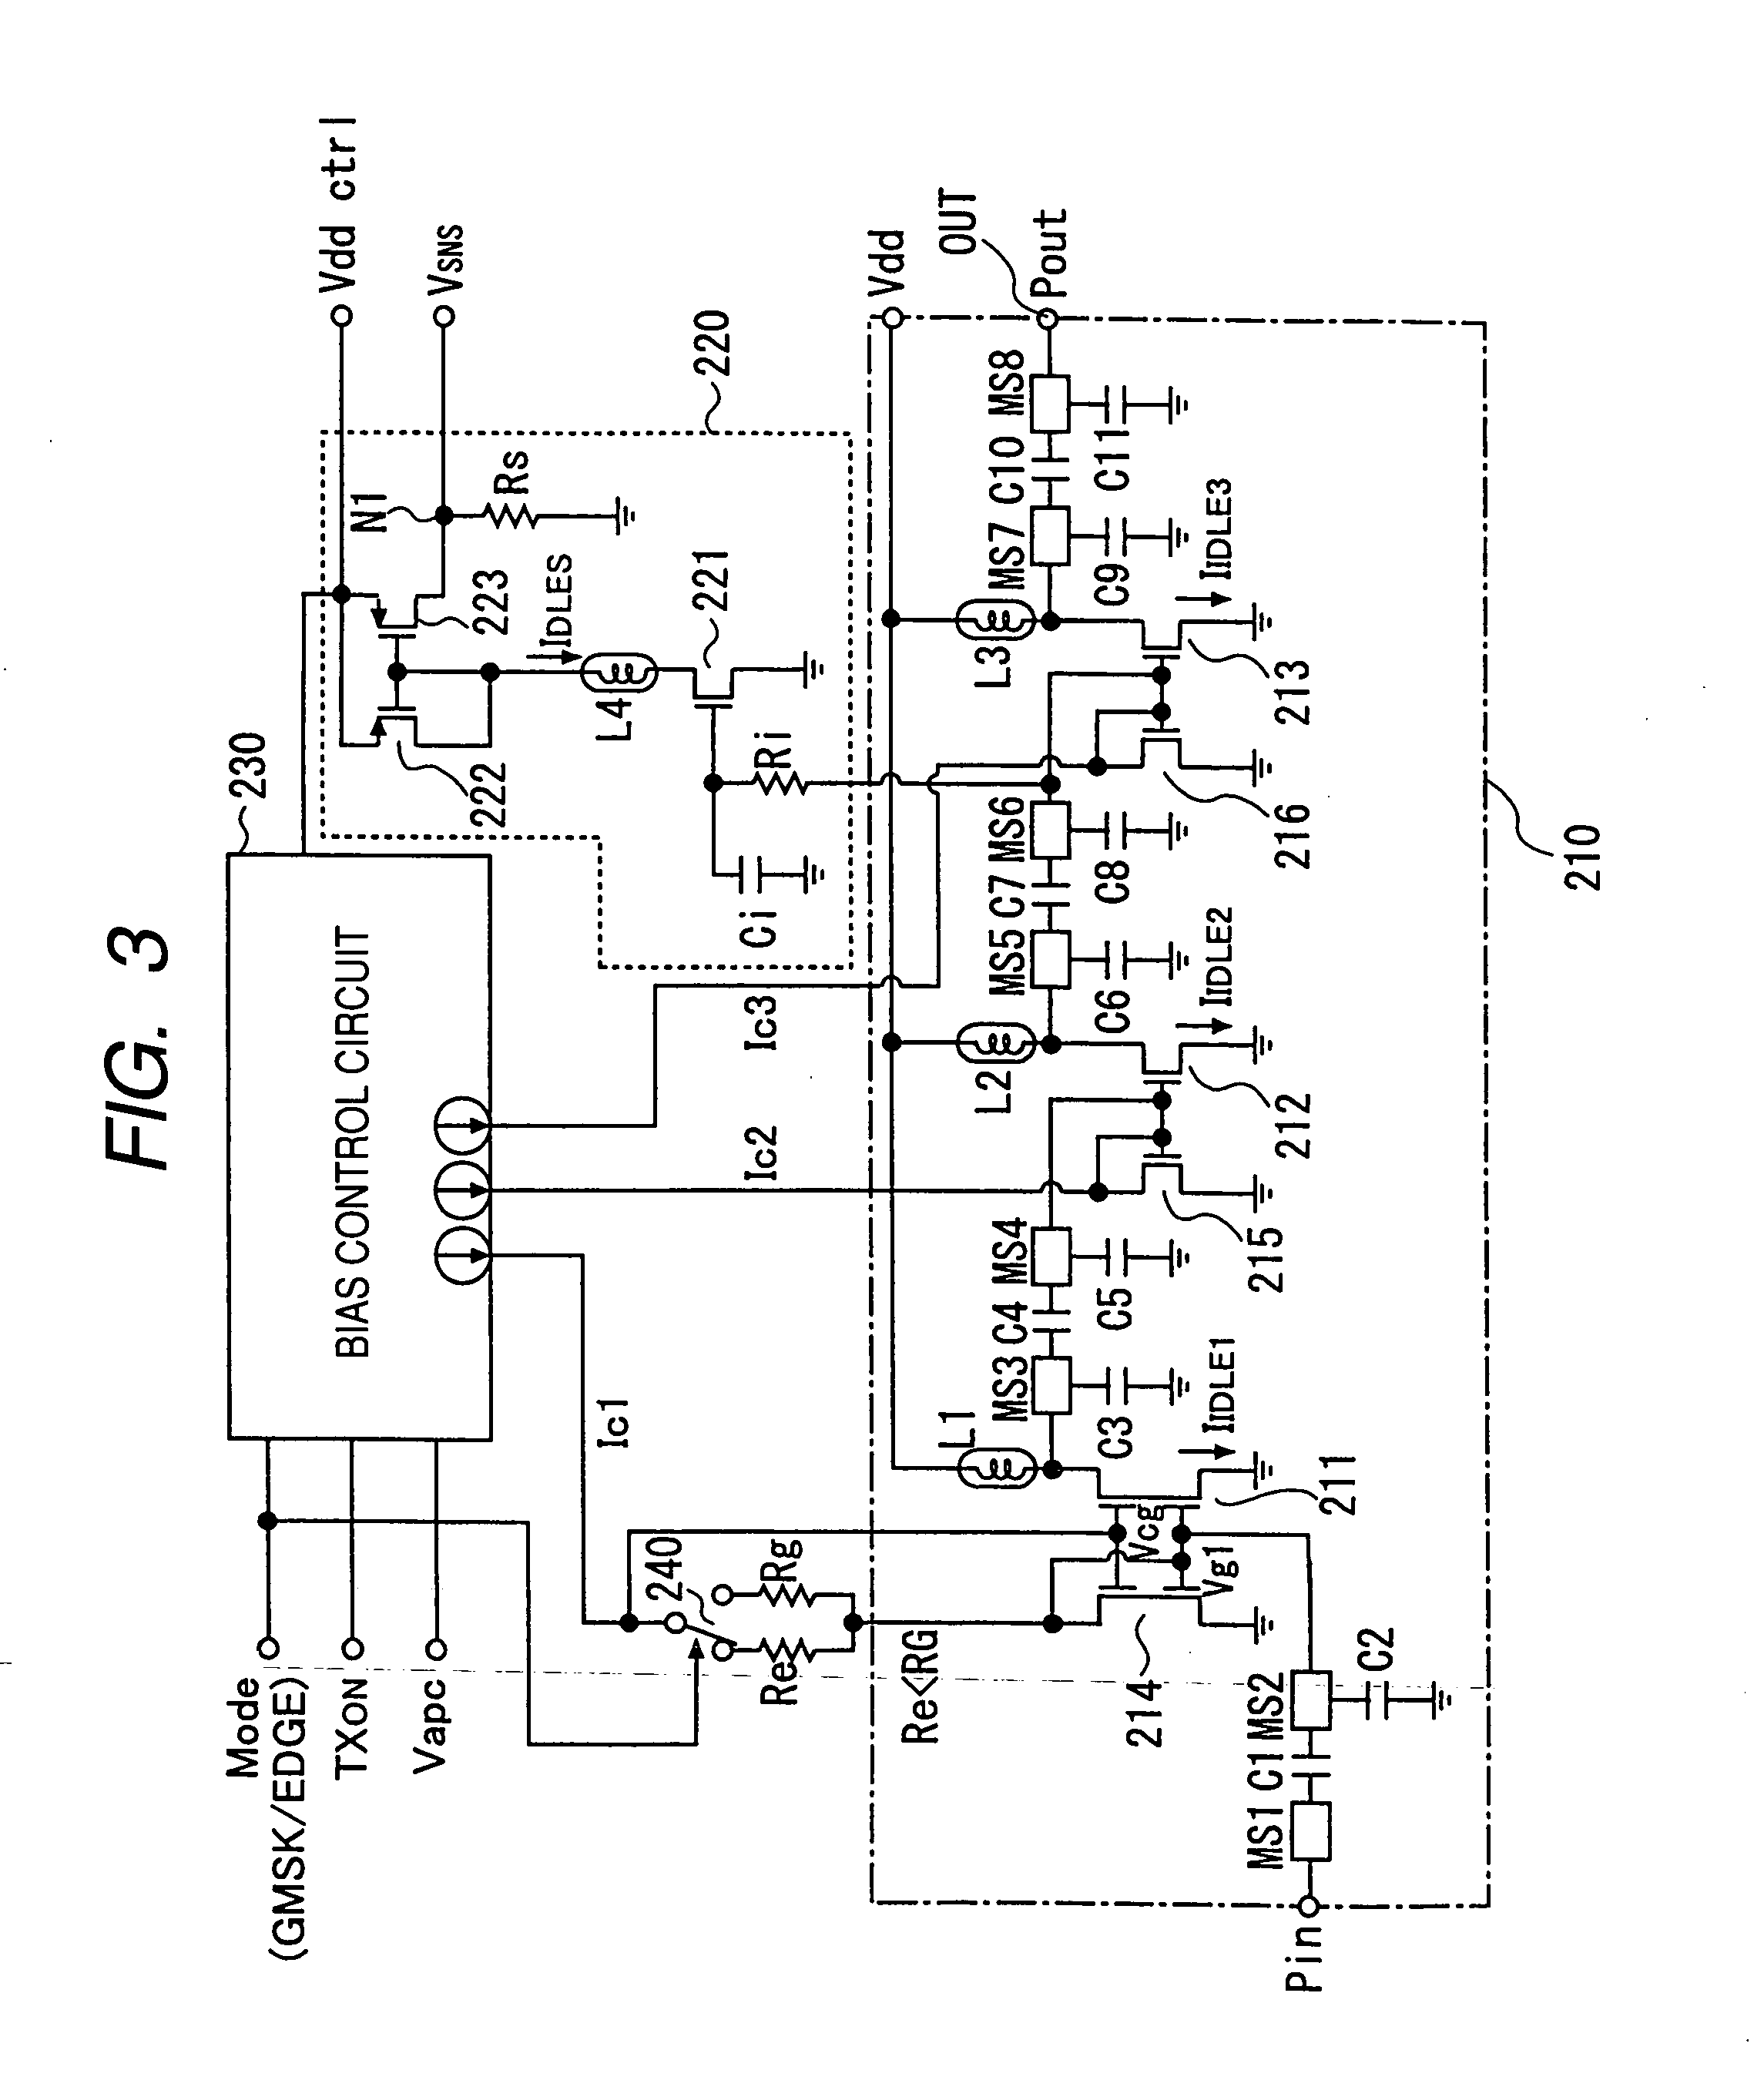 High-frequency power amplifier circuit and electronic part for communication